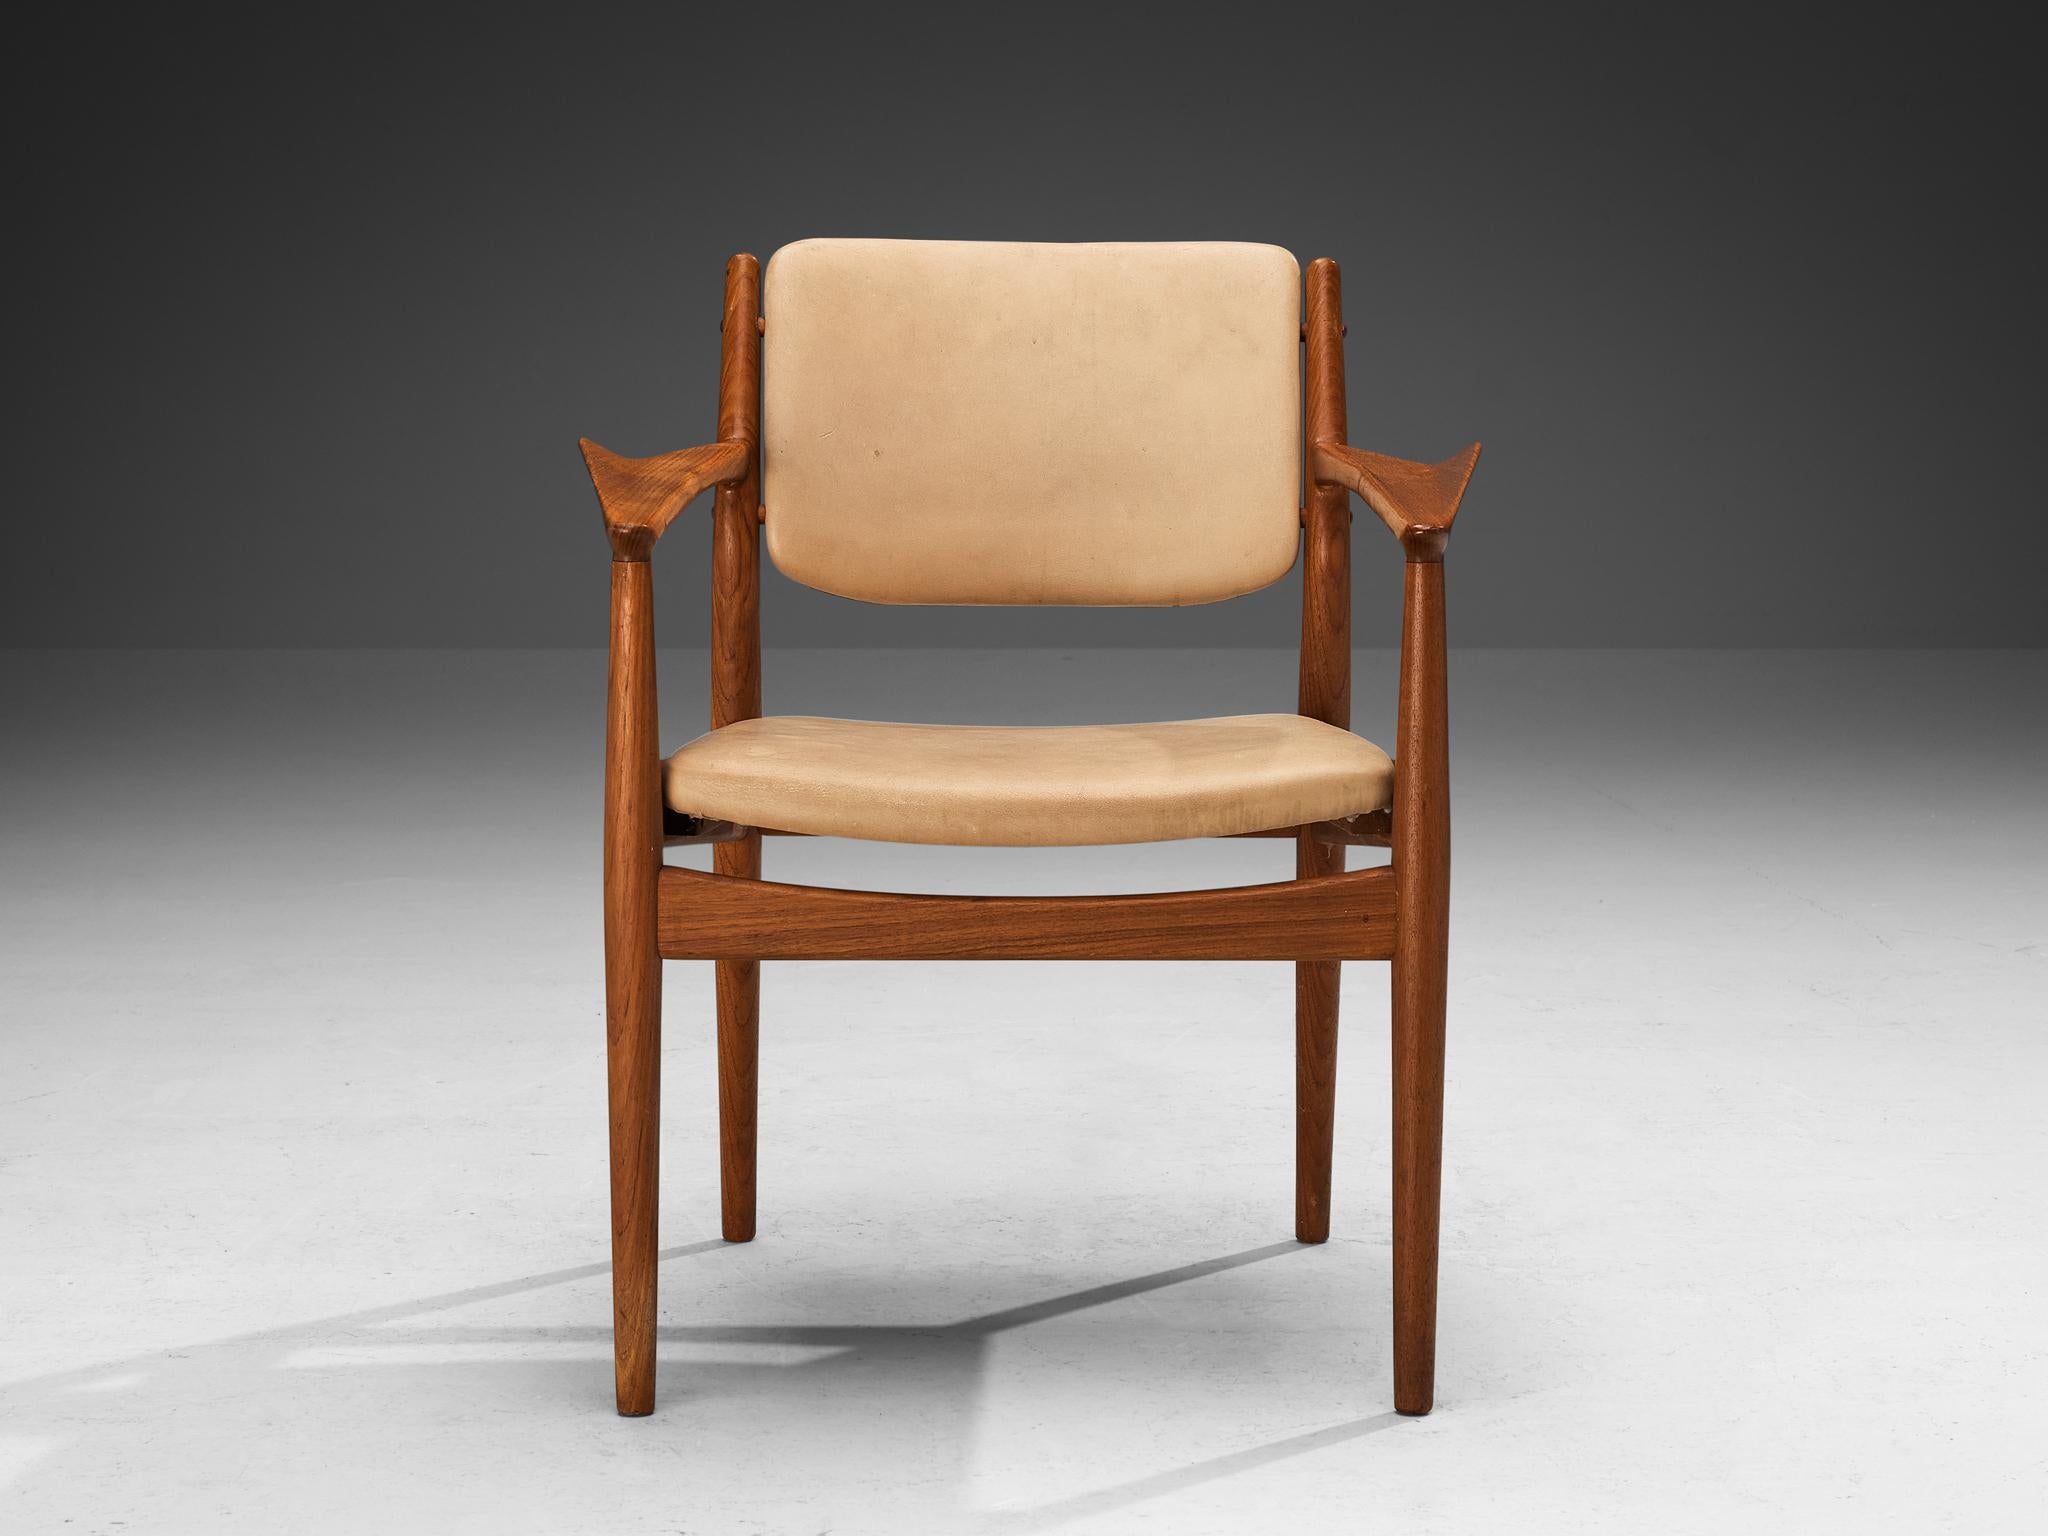 Mid-20th Century Arne Vodder for Sibast Pair of Armchairs in Teak and Beige Upholstery  For Sale